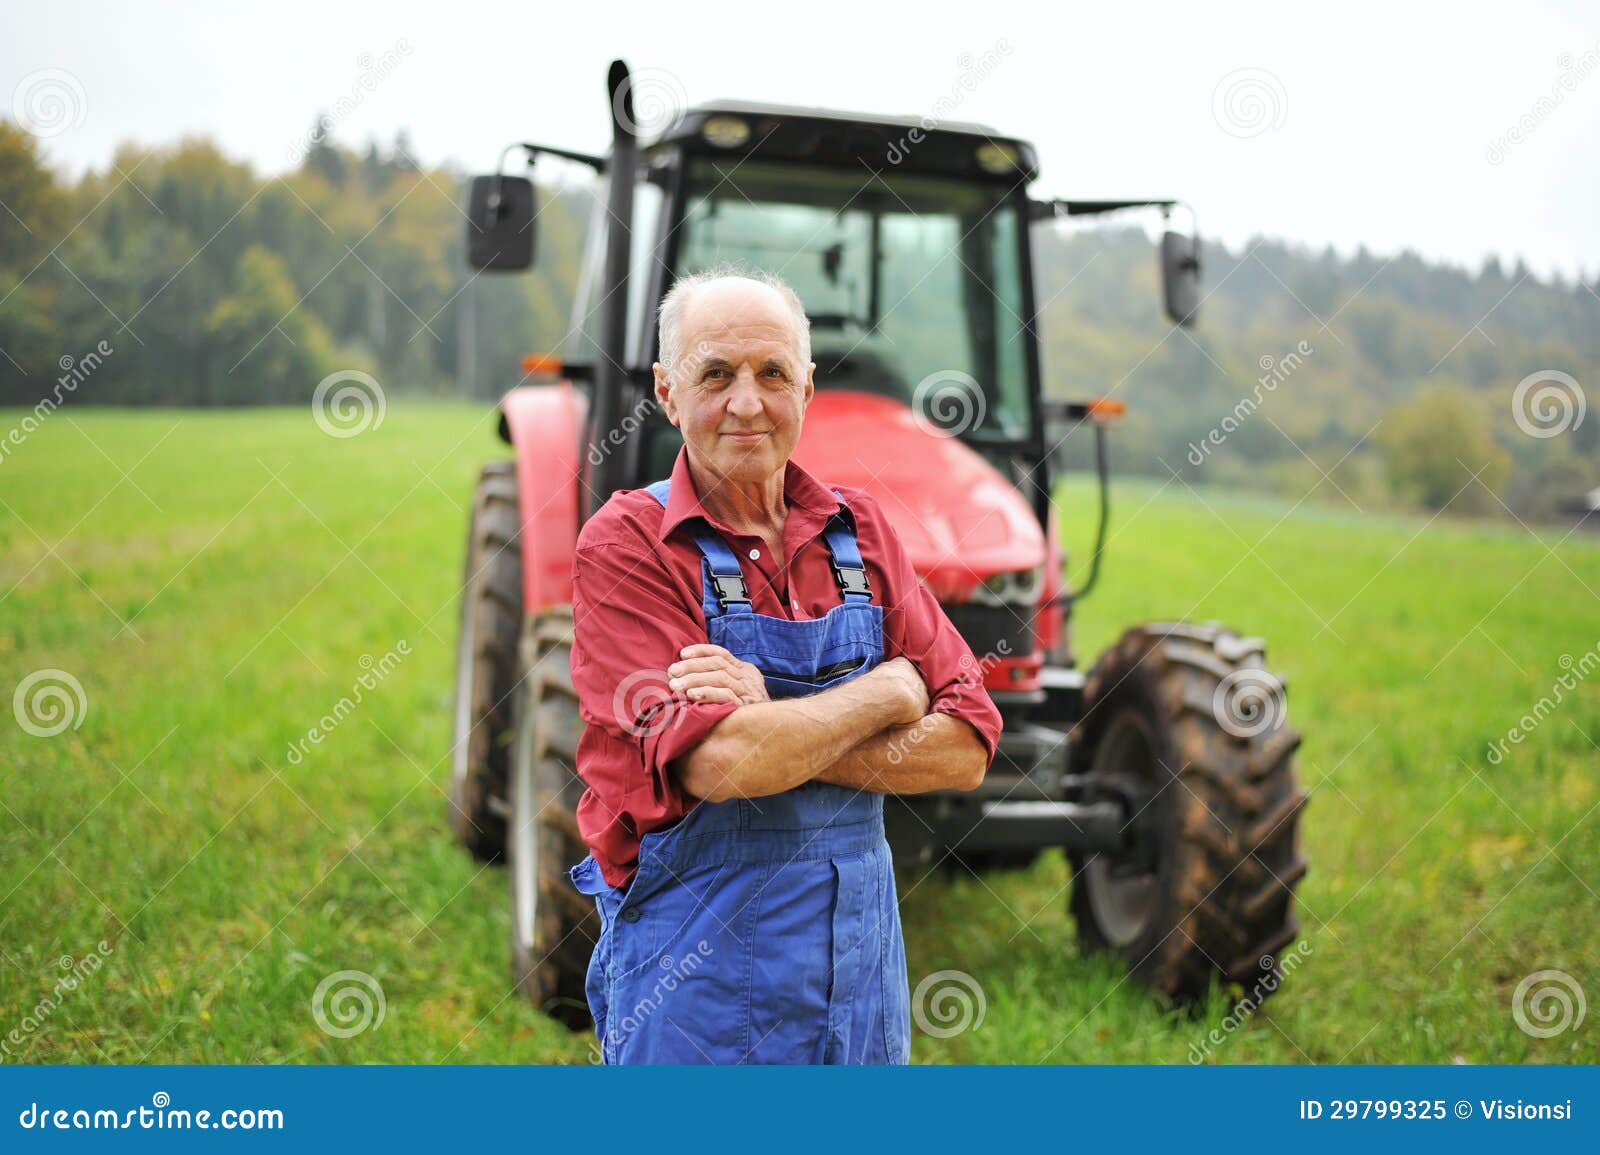 farmer and his red tractor